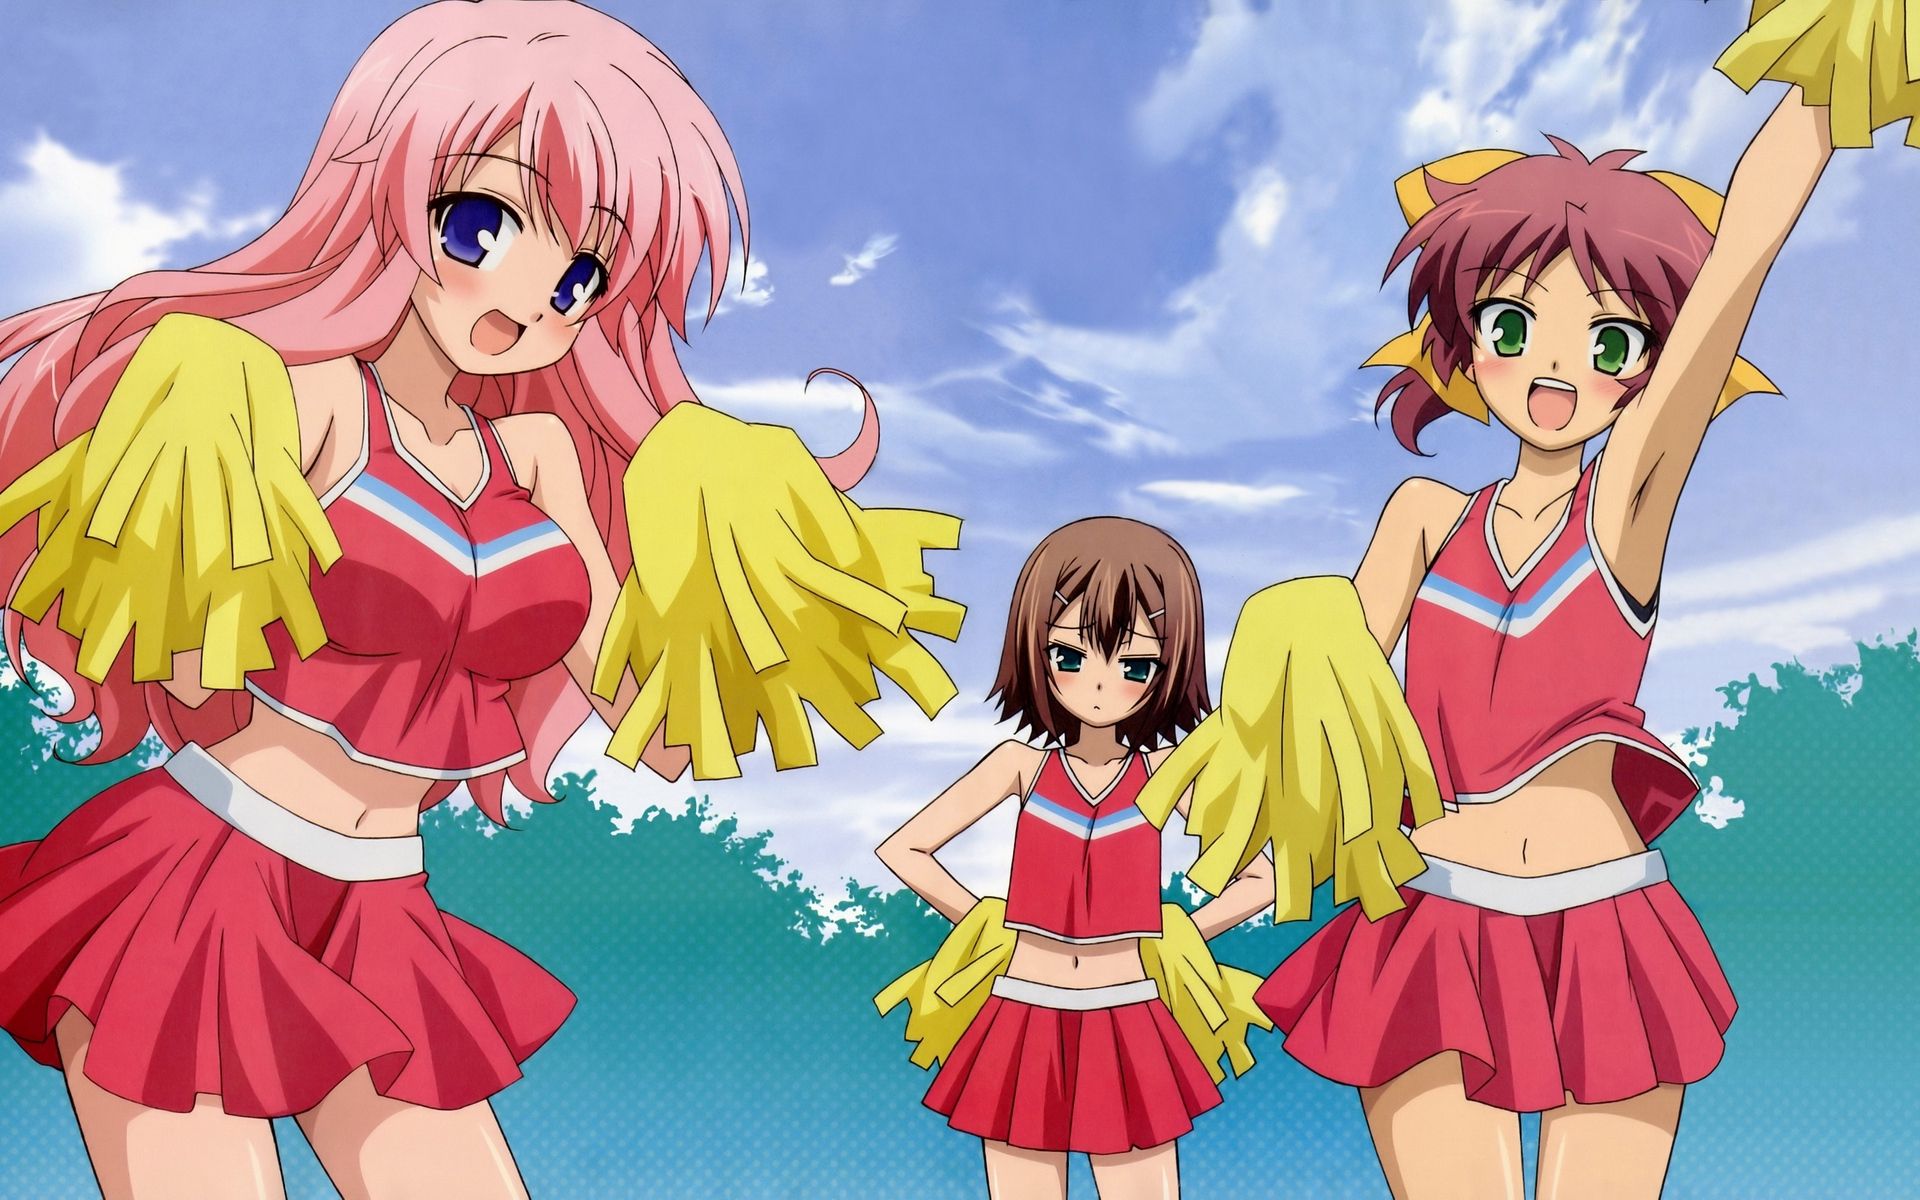 Download wallpaper 1920x1200 anime, girls, group, support, dance